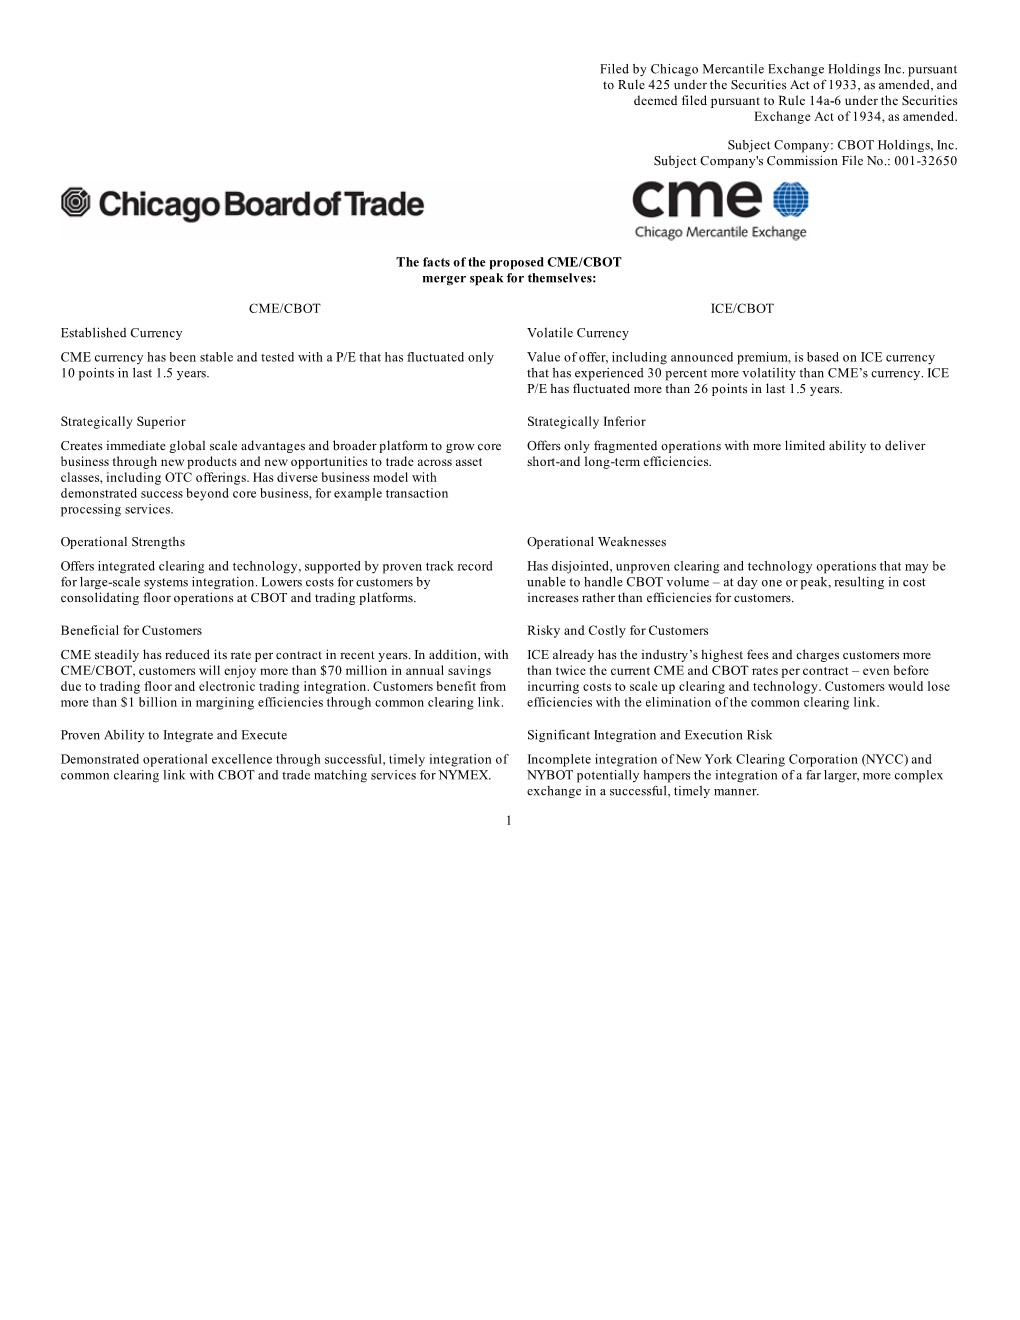 Filed by Chicago Mercantile Exchange Holdings Inc. Pursuant To